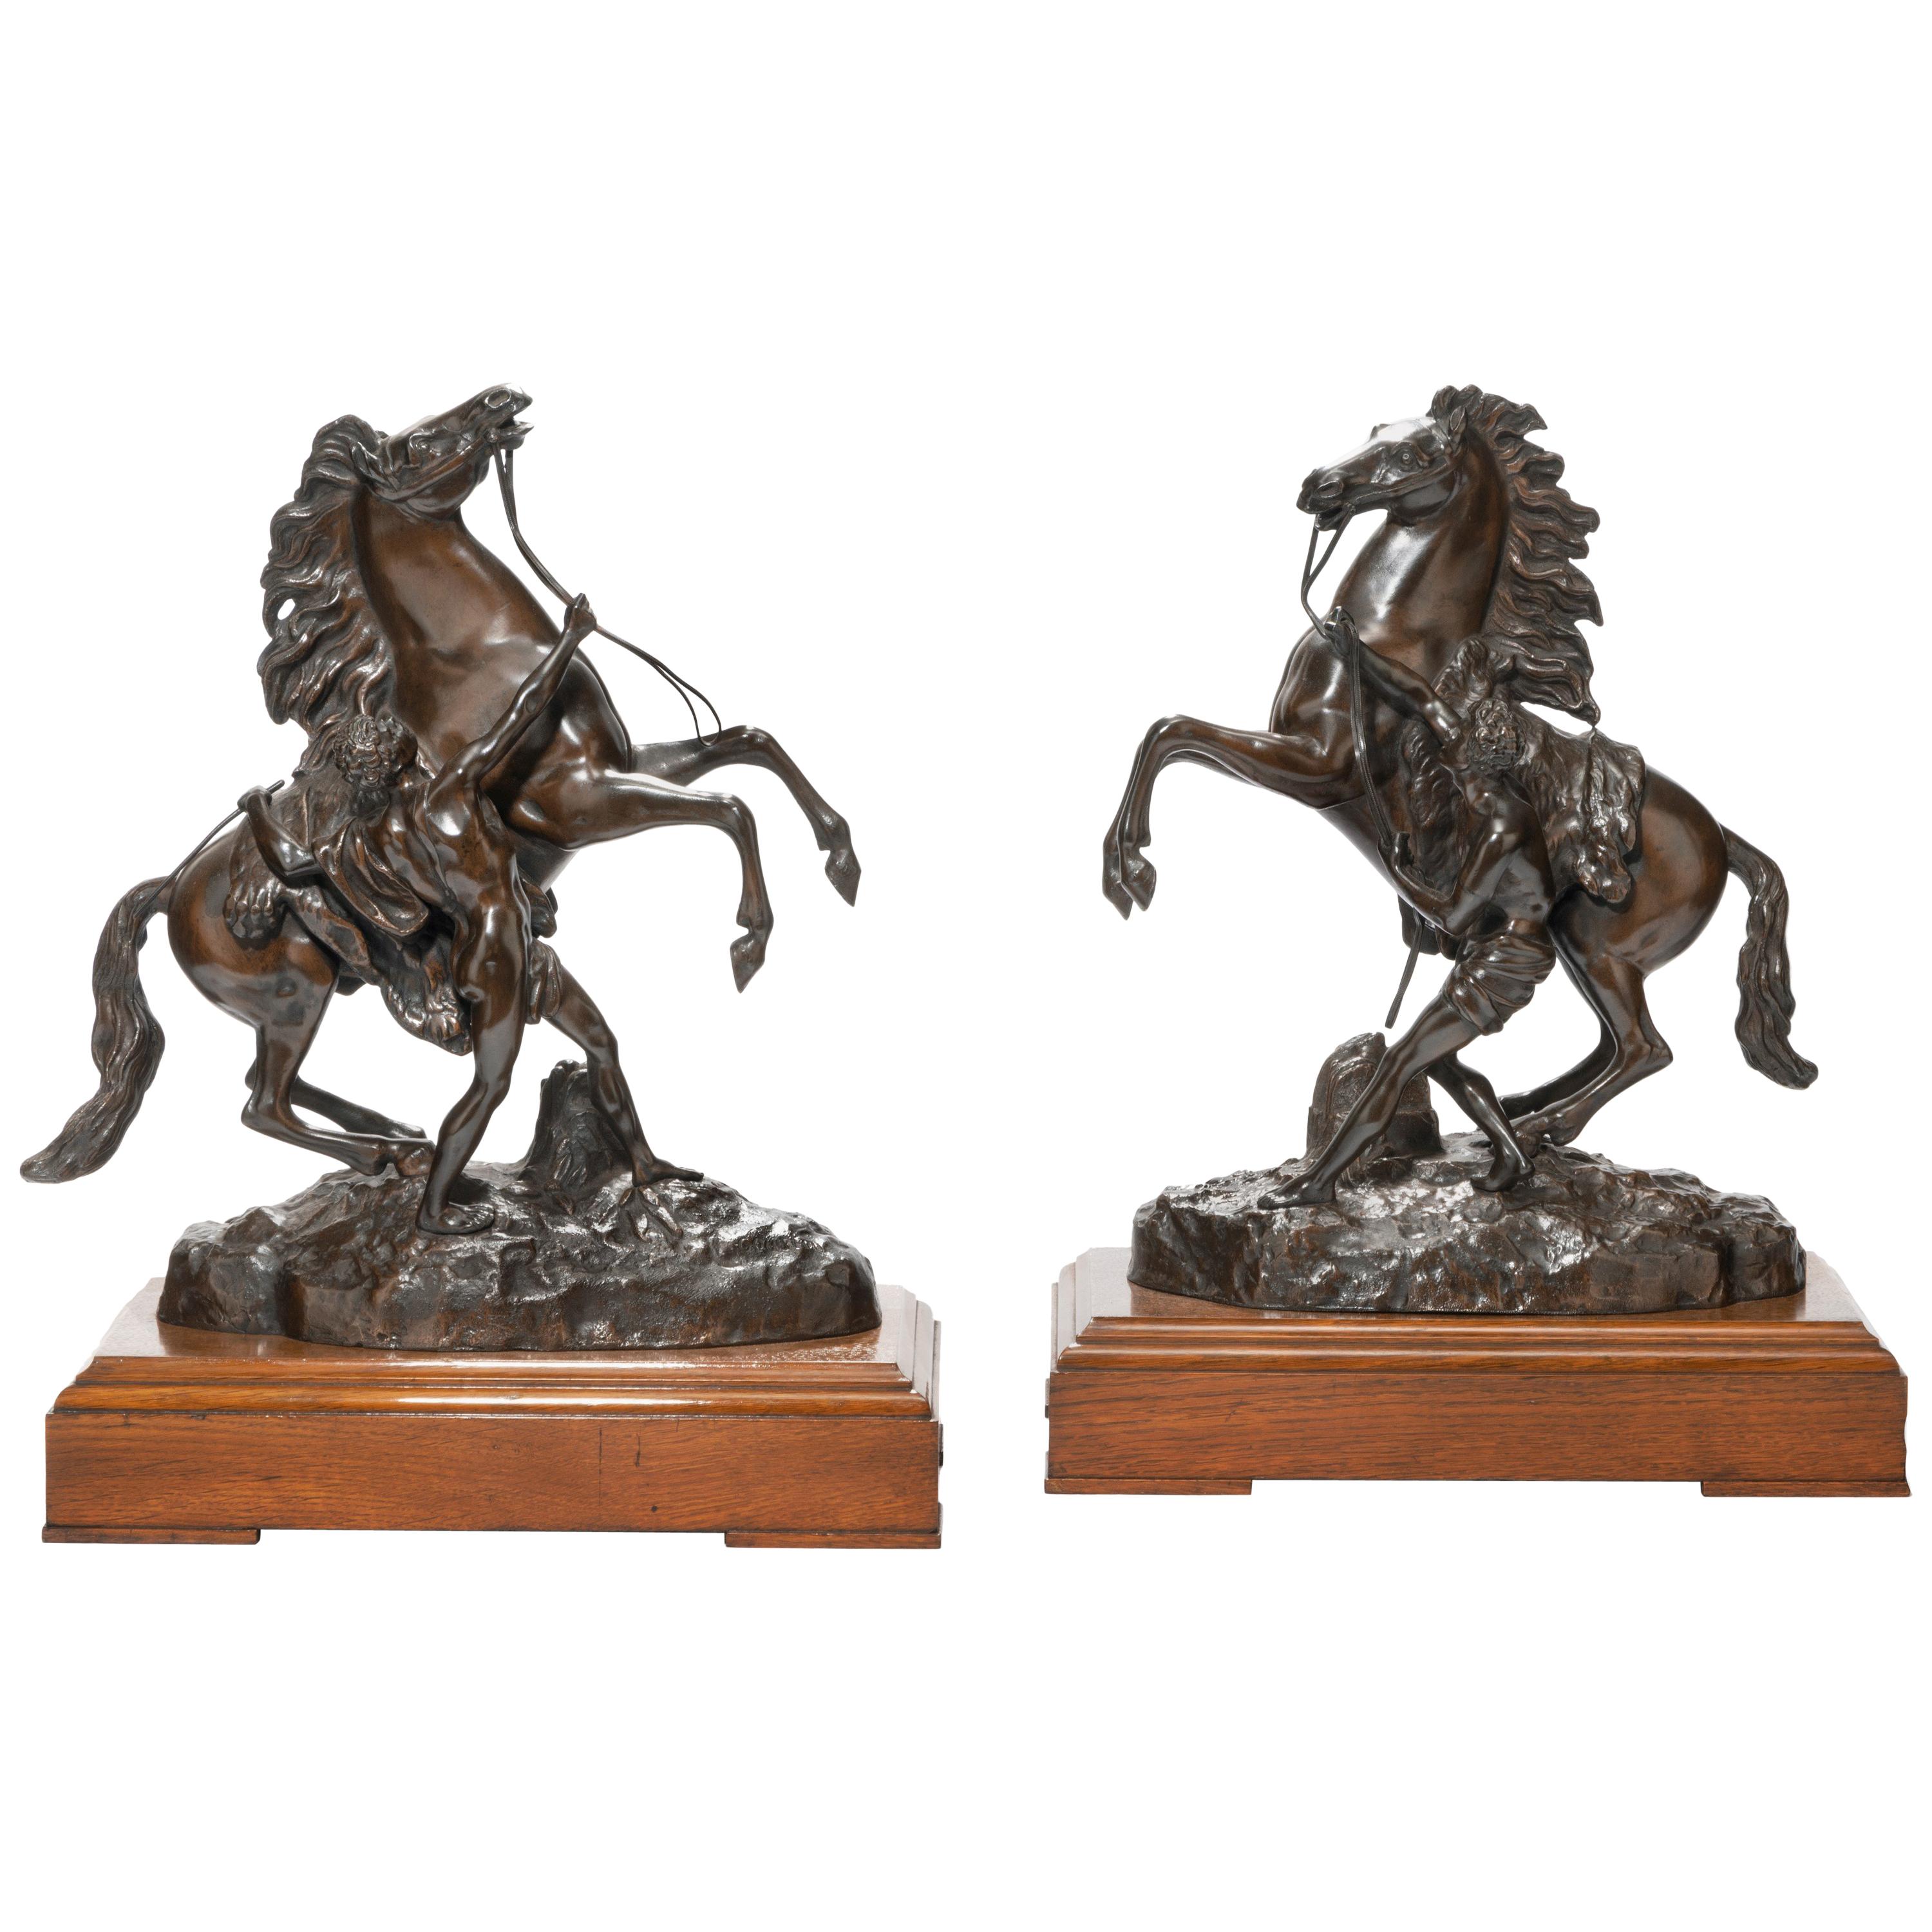 19th Century Bronze Sculptures of the Marly Horses